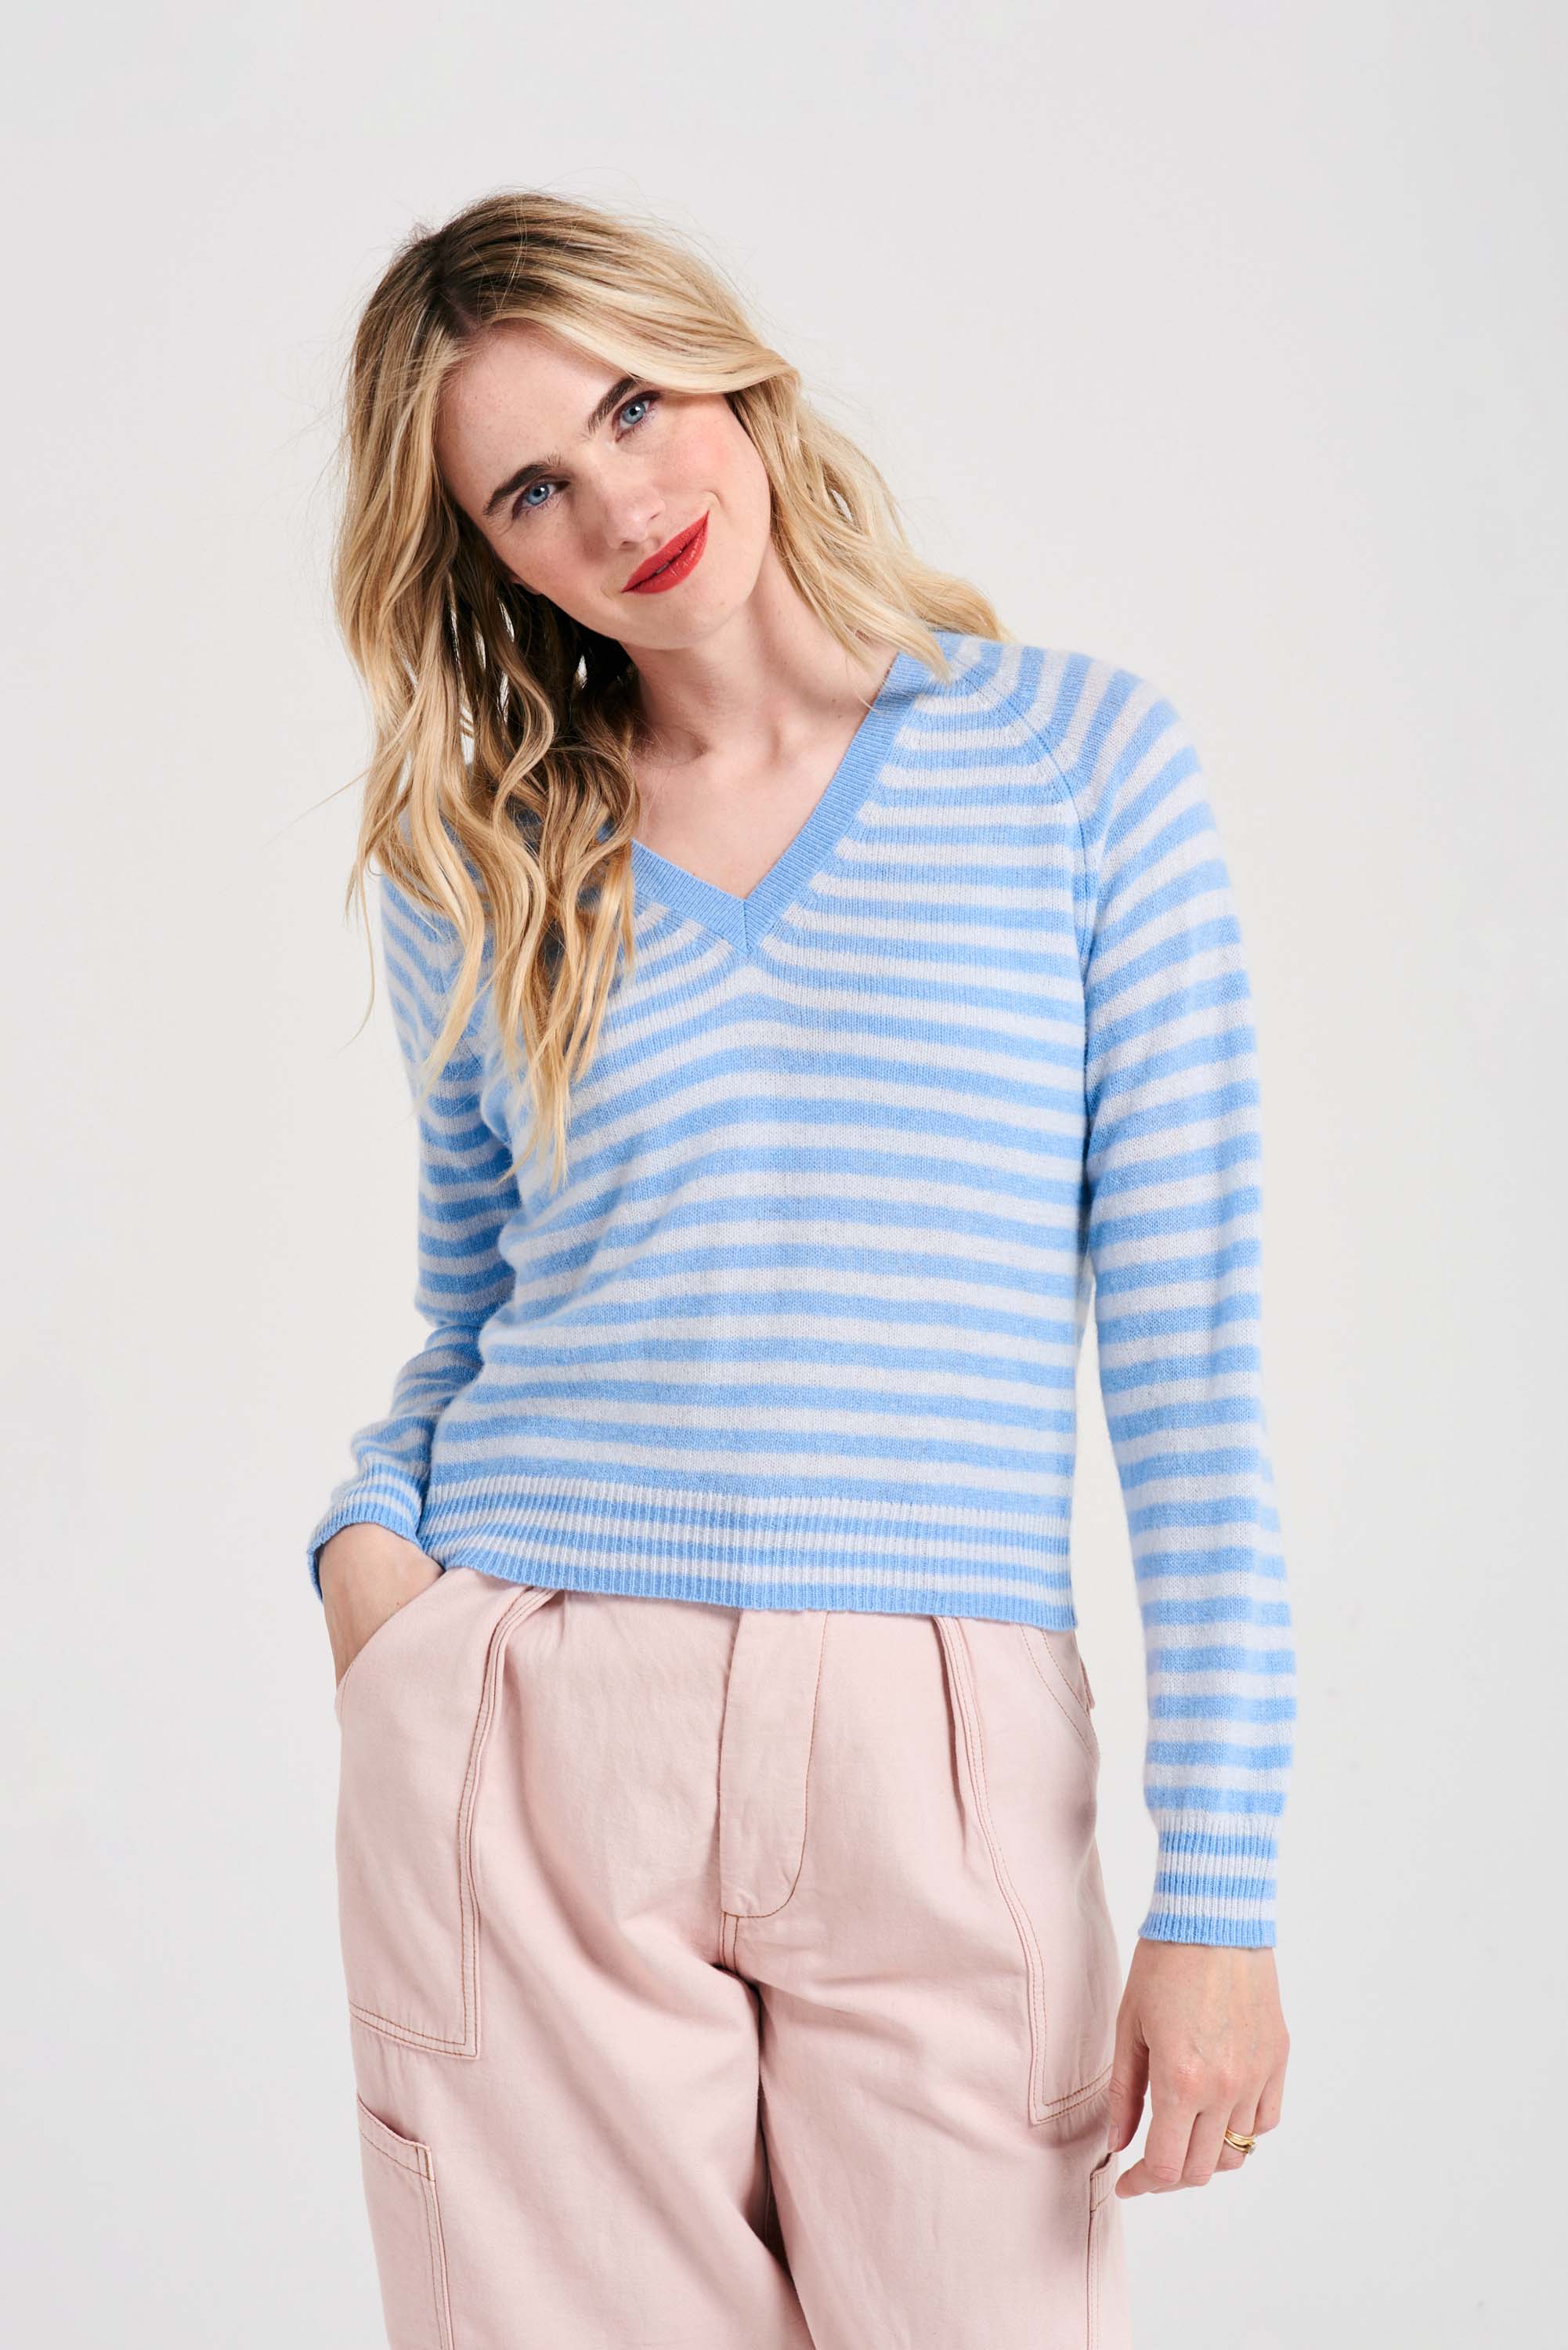 Blonde female model wearing Jumper1234 Wedgewood and cement narrow stripe lighter weight vee neck cashmere jumper